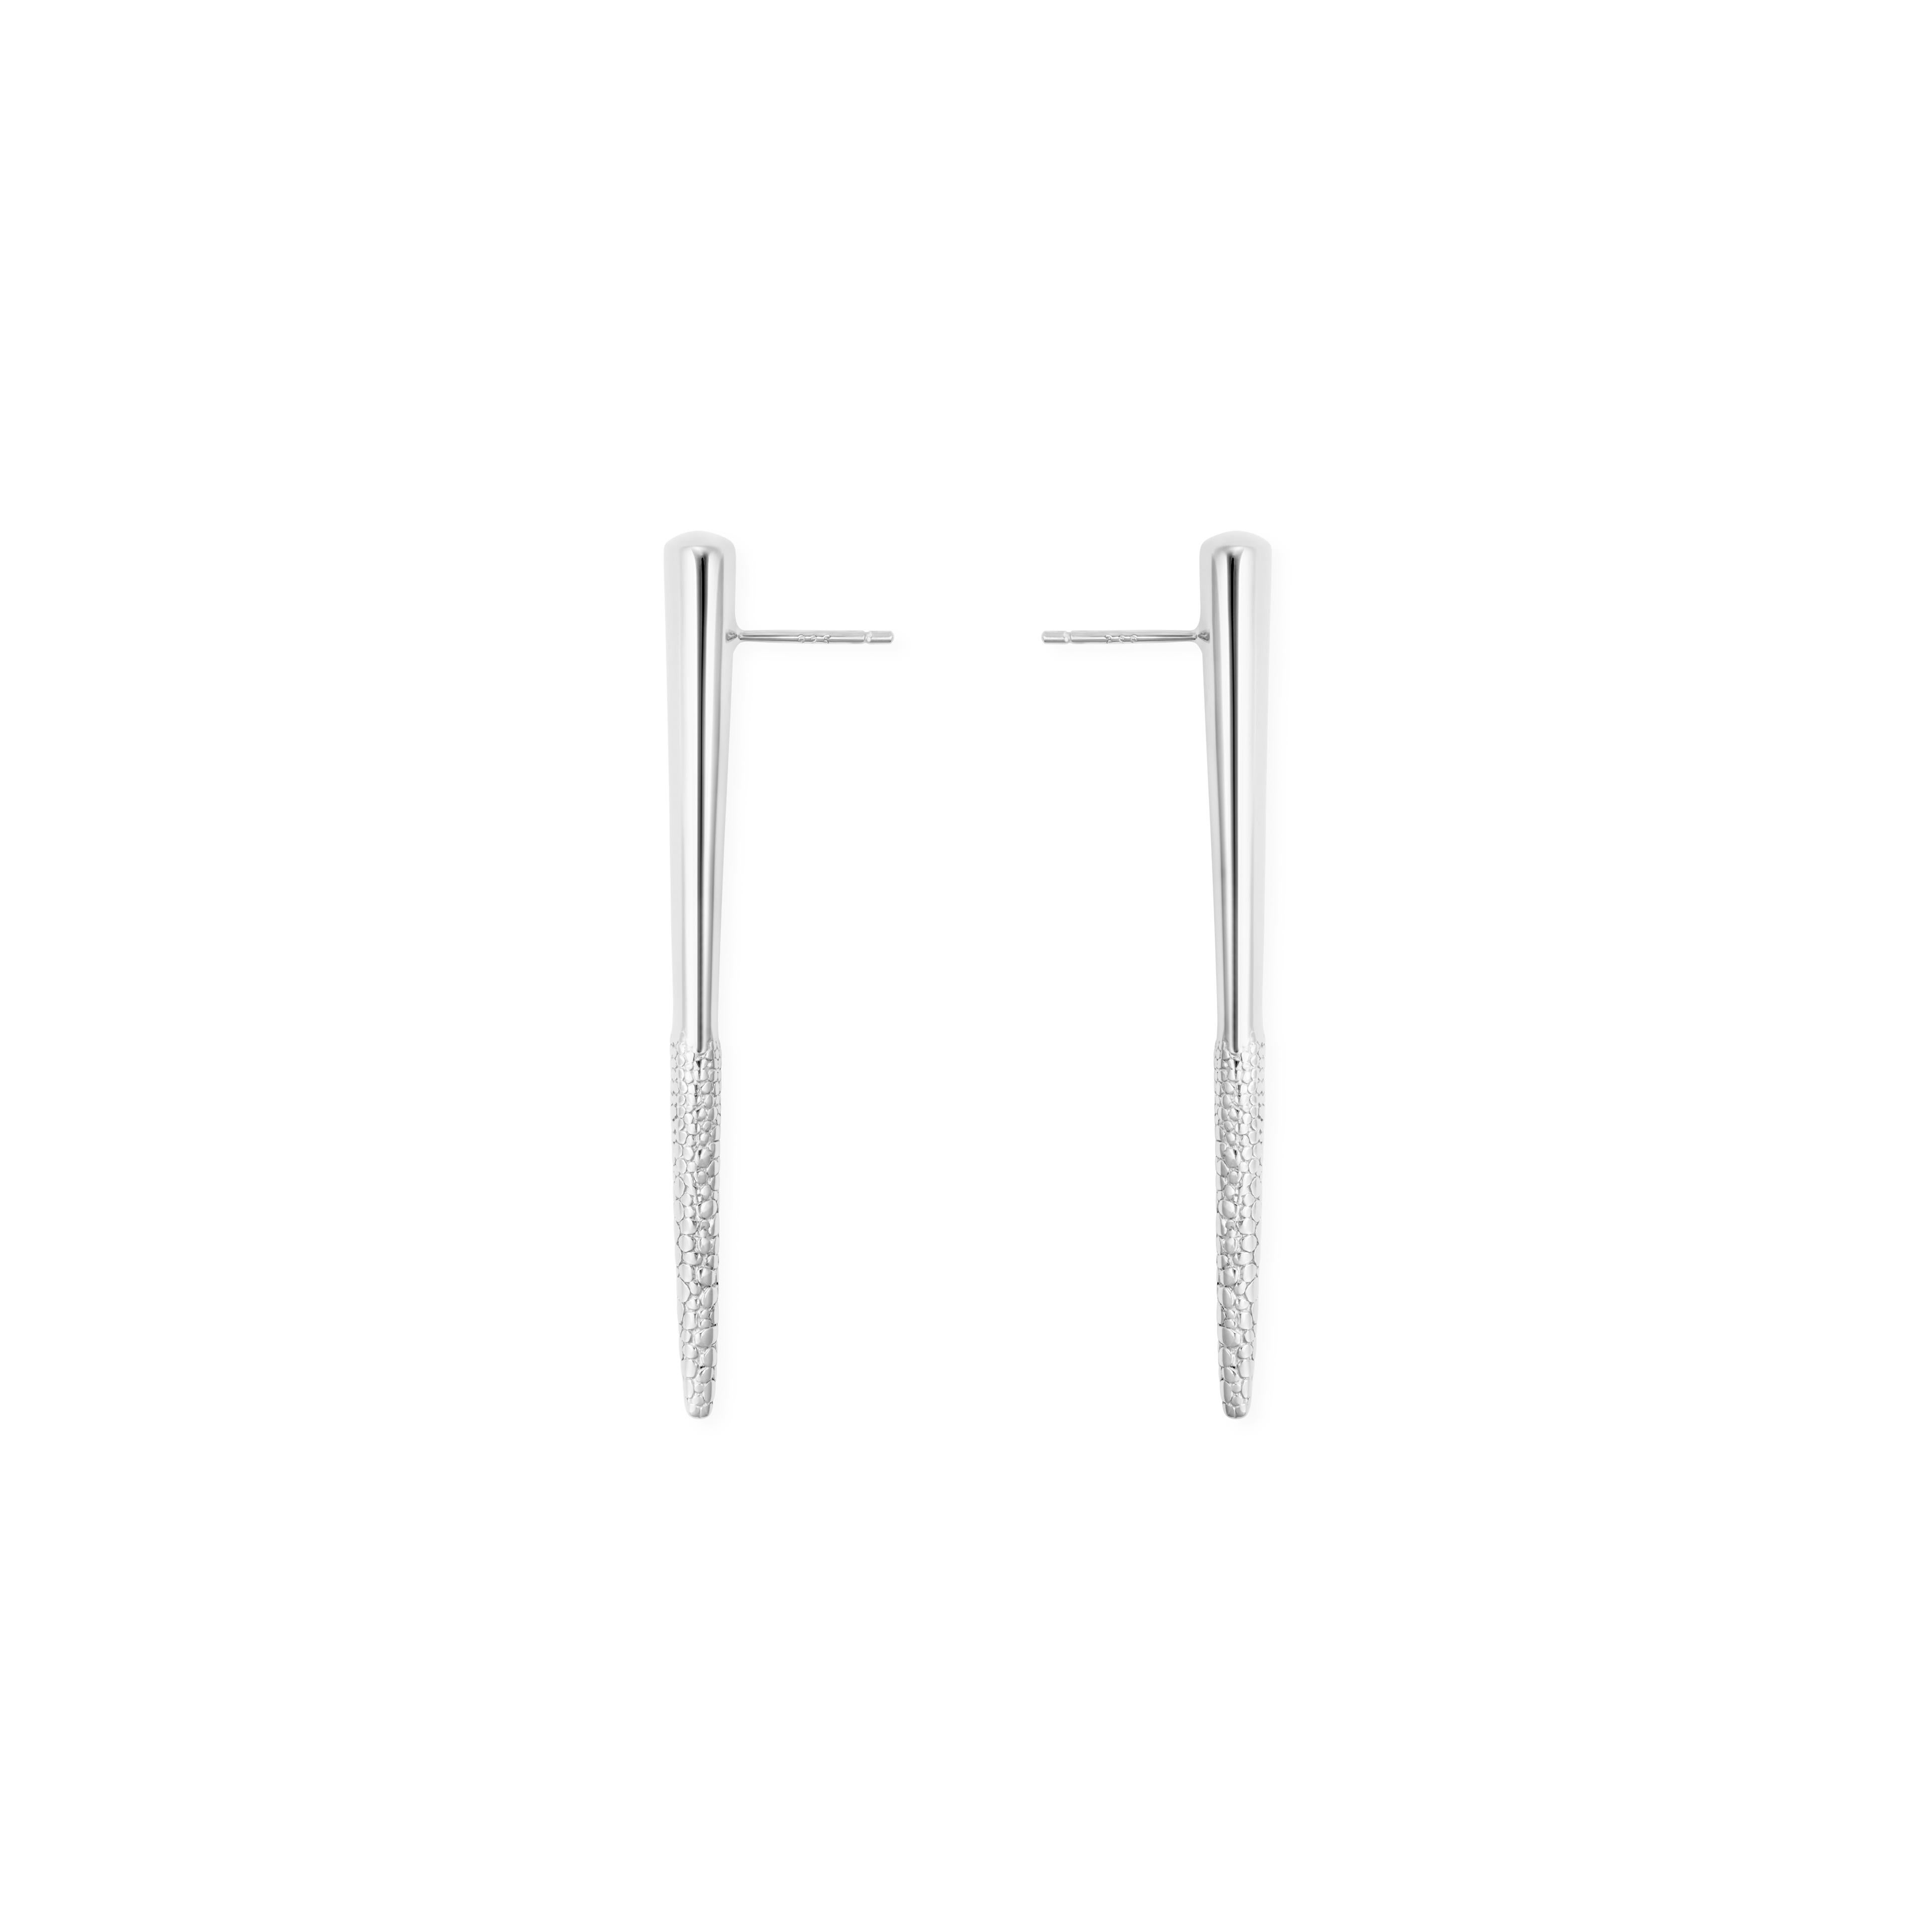 The Particle Earrings, by Mistova, are from the NOVA 01 collection.The earrings are made from sterling silver and have a strong and fluid design. The bottom has a textured surface treatment to add contrast to these earrings.  Highly polished surface